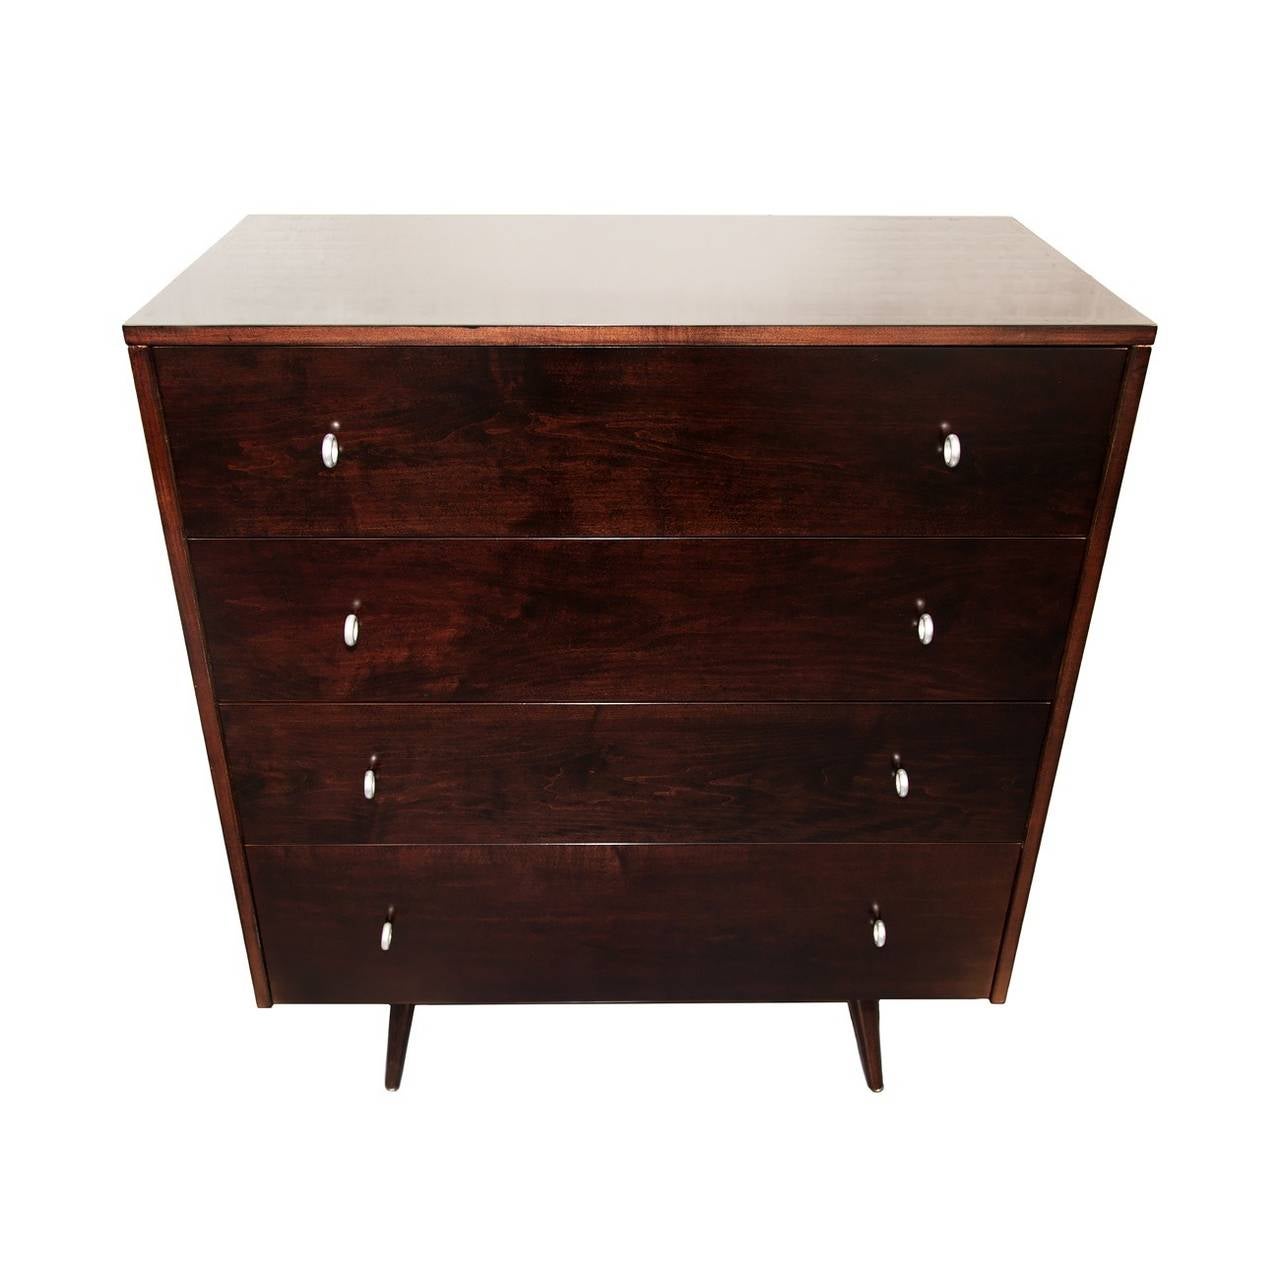 A modernist four-drawer Paul McCobb Planner Group chest or dresser. Newly restored and refinished in a dark walnut stain. Satin silver pulls.